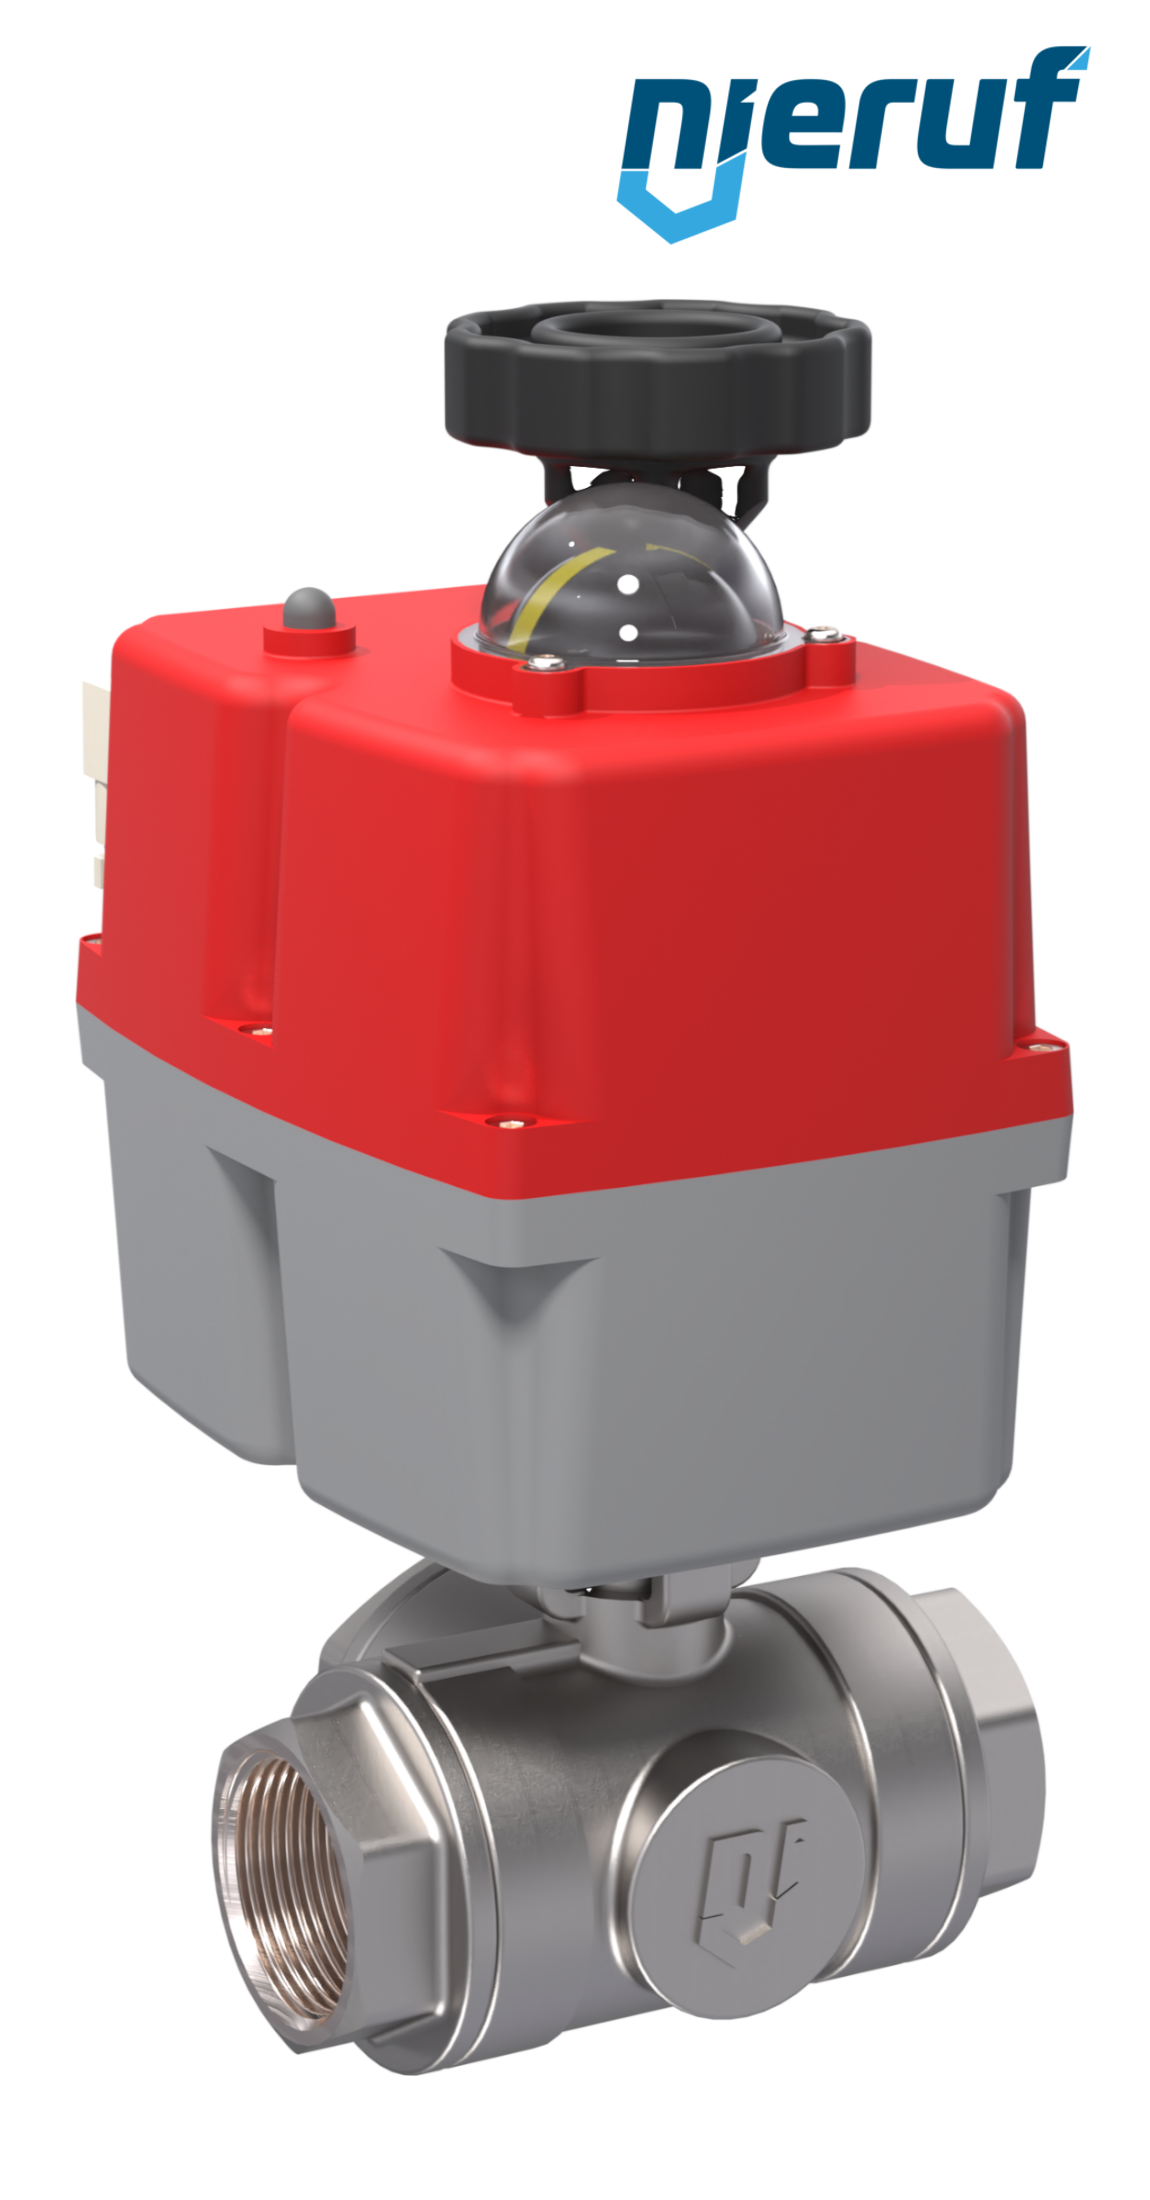 3 way automatic-ball valve 24-240V DN8 - 1/4" inch stainless steel reduced port design with T drilling